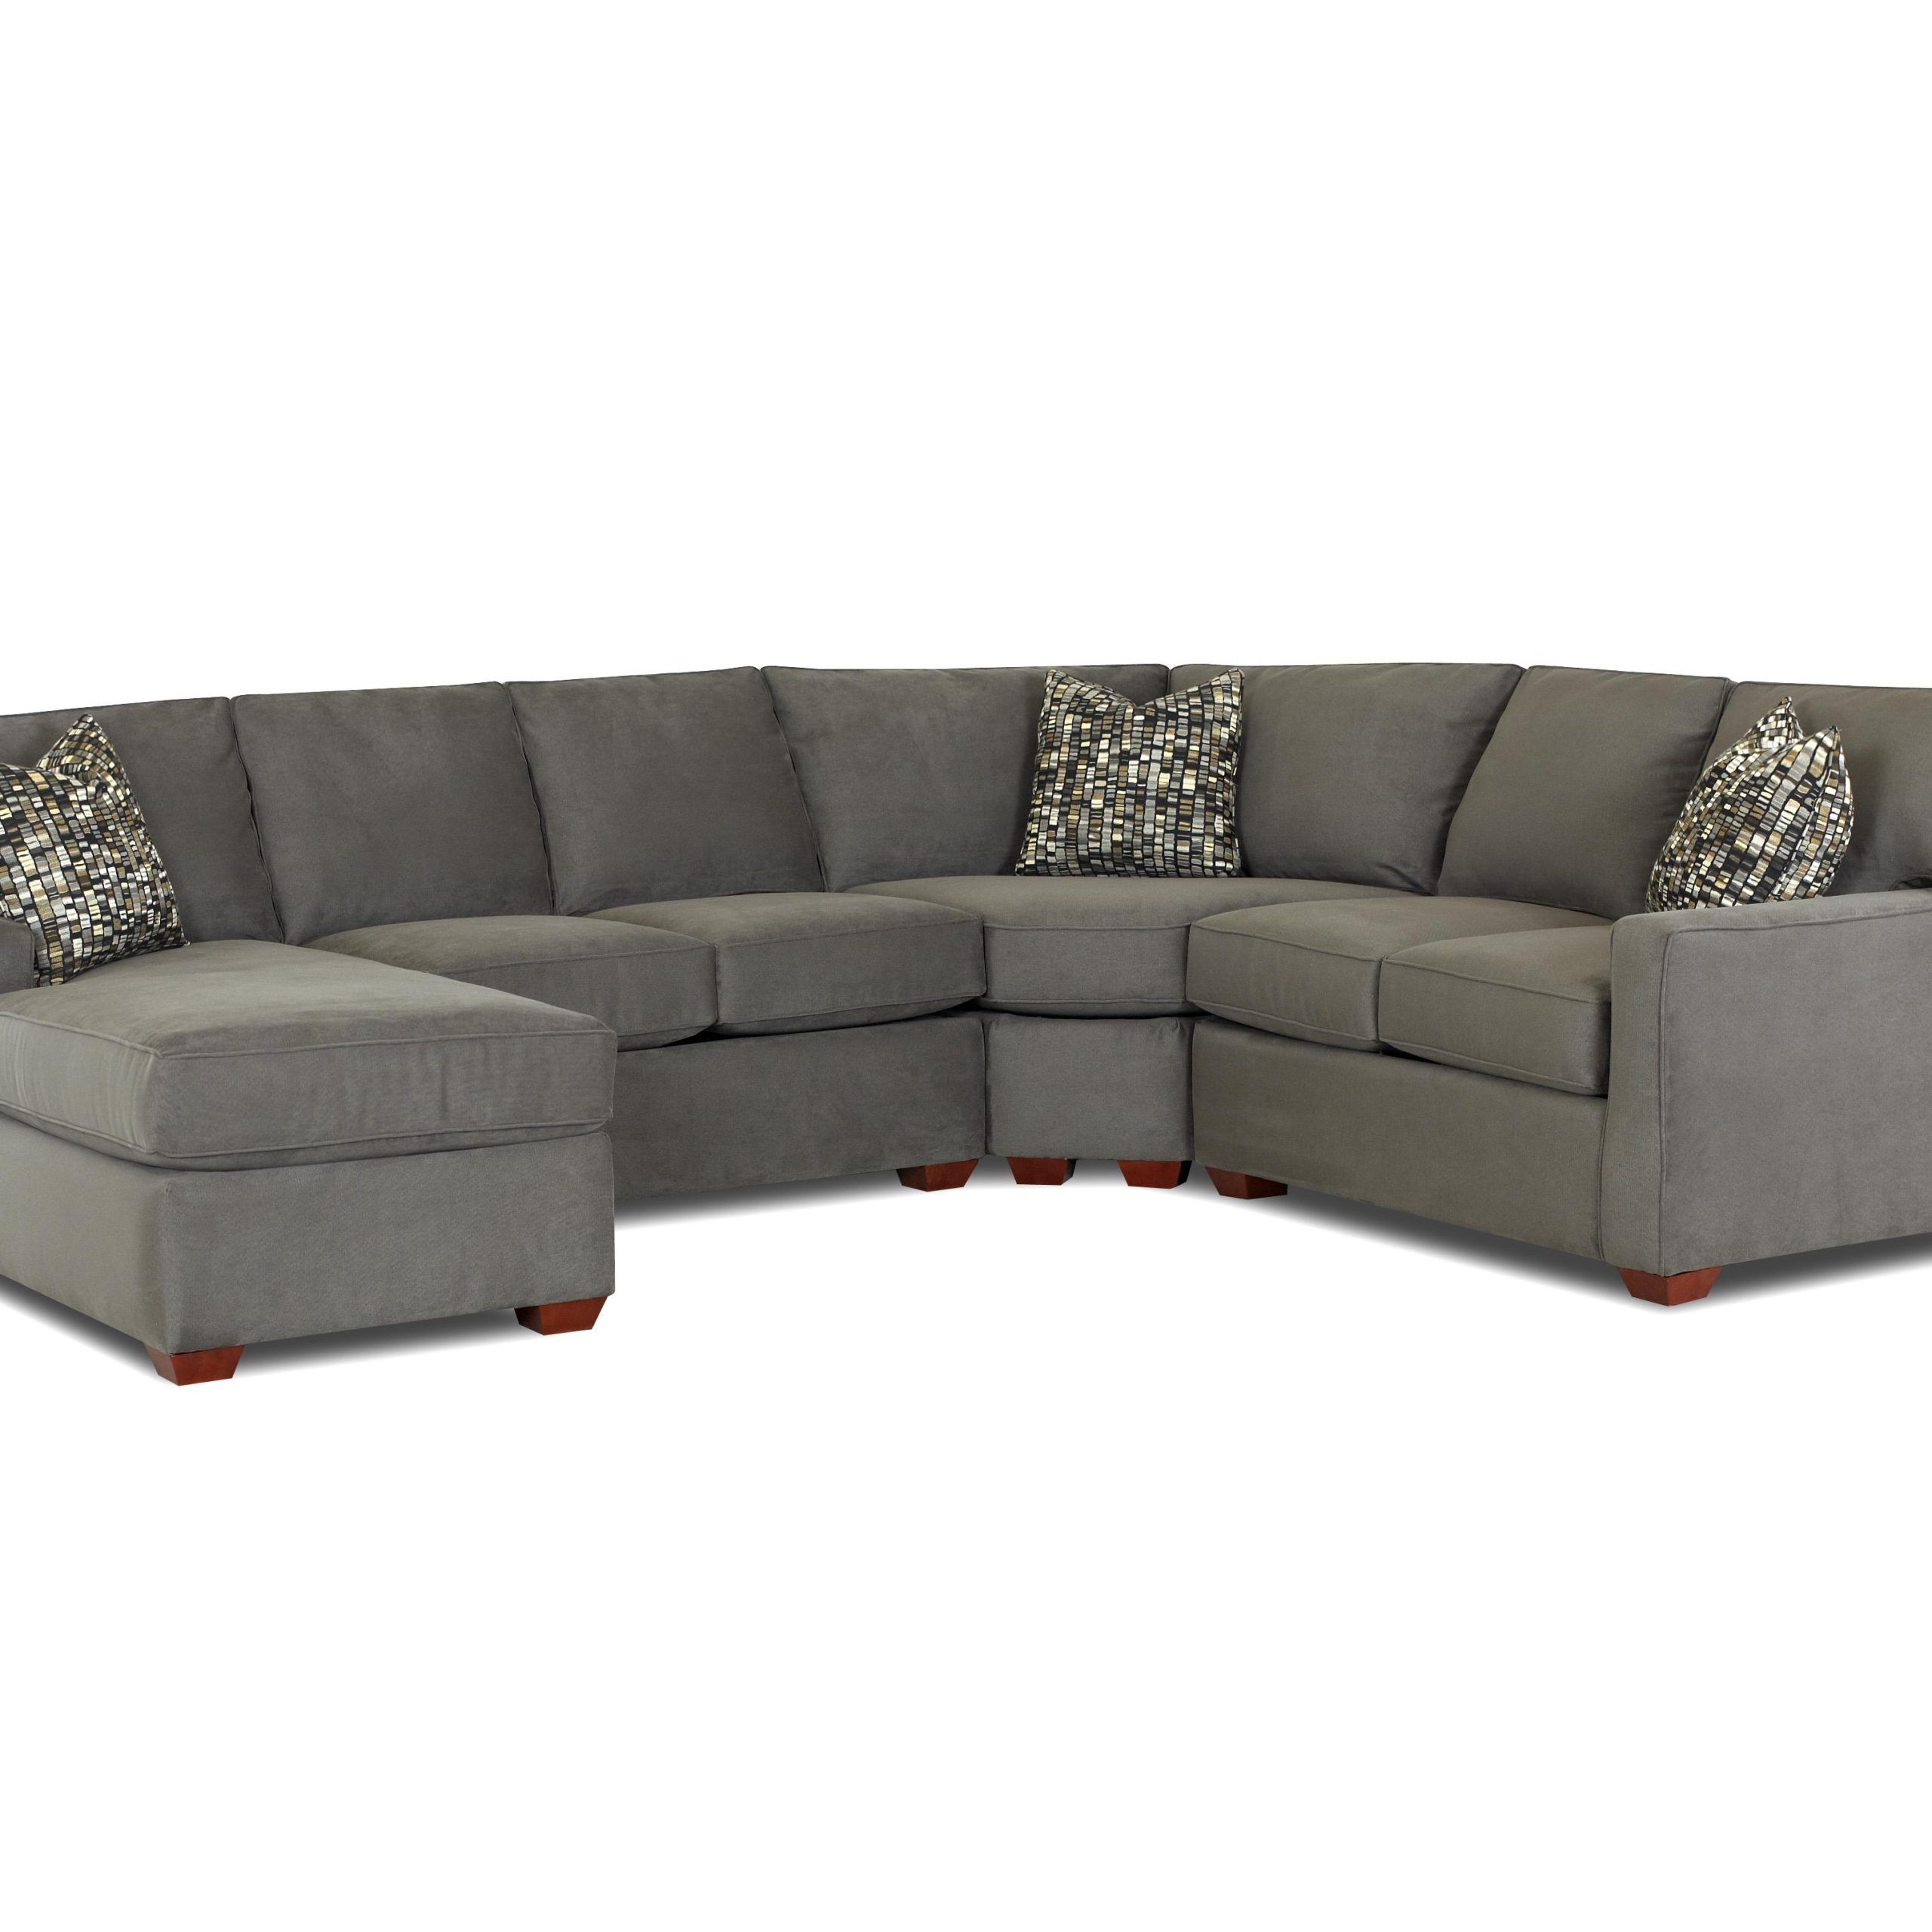 Contemporary L Shaped Sectional Sofa With Right Arm Facing Chaise Inside Modern L Shaped Sofa Sectionals (Gallery 2 of 20)